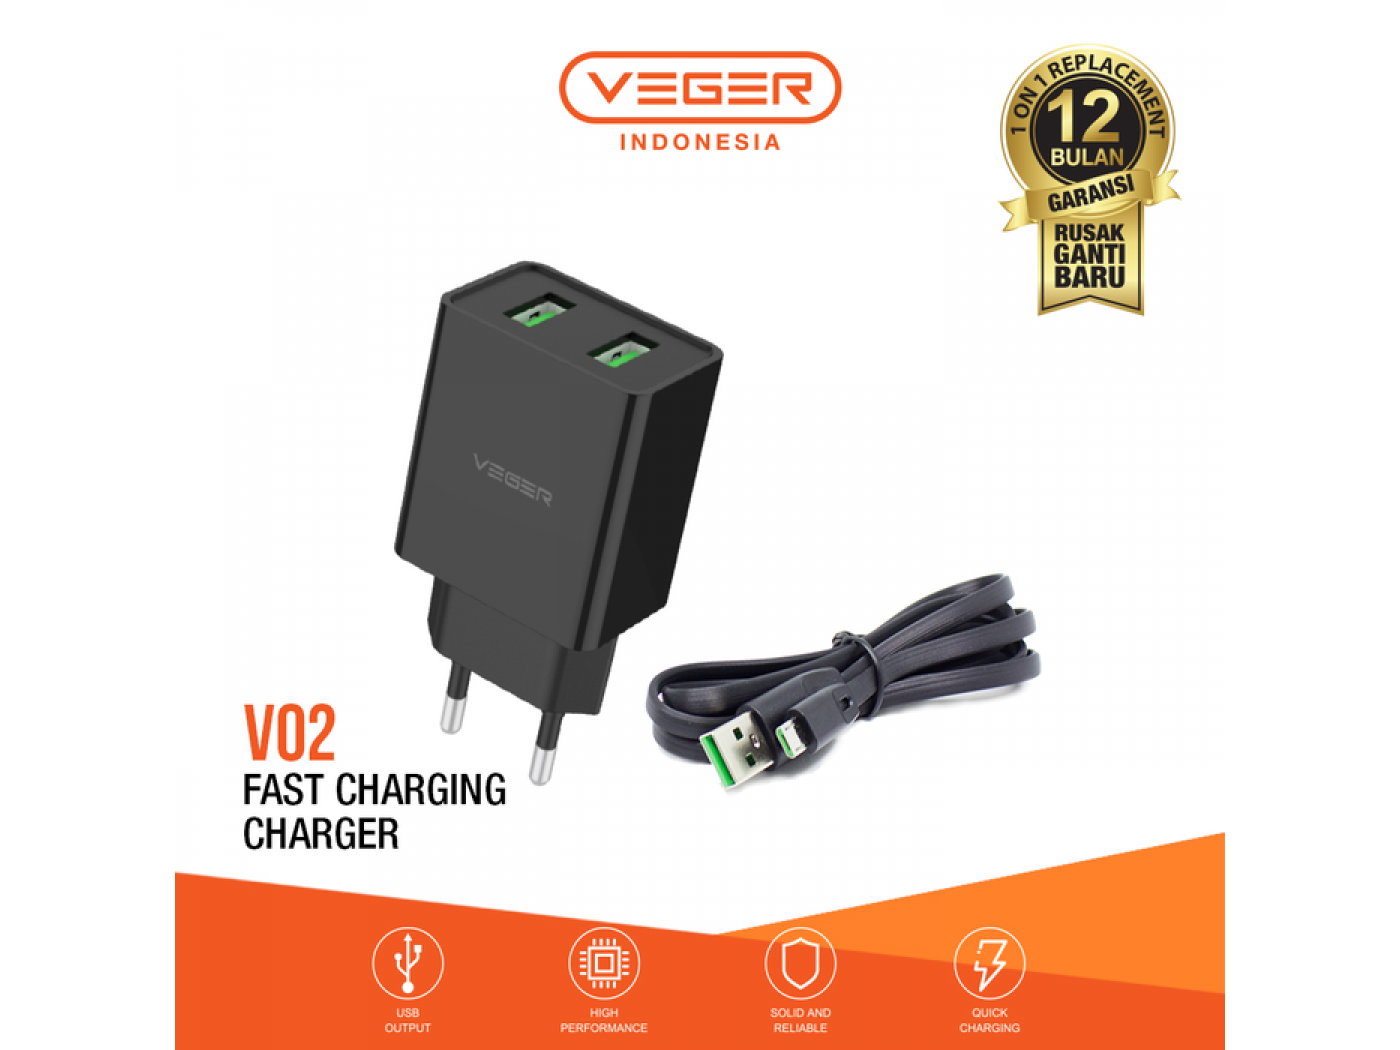 Fast support. Блок питания fast charge. Travel Charger. Драйвер питания fast charge. 2 В 2 fast Charging.